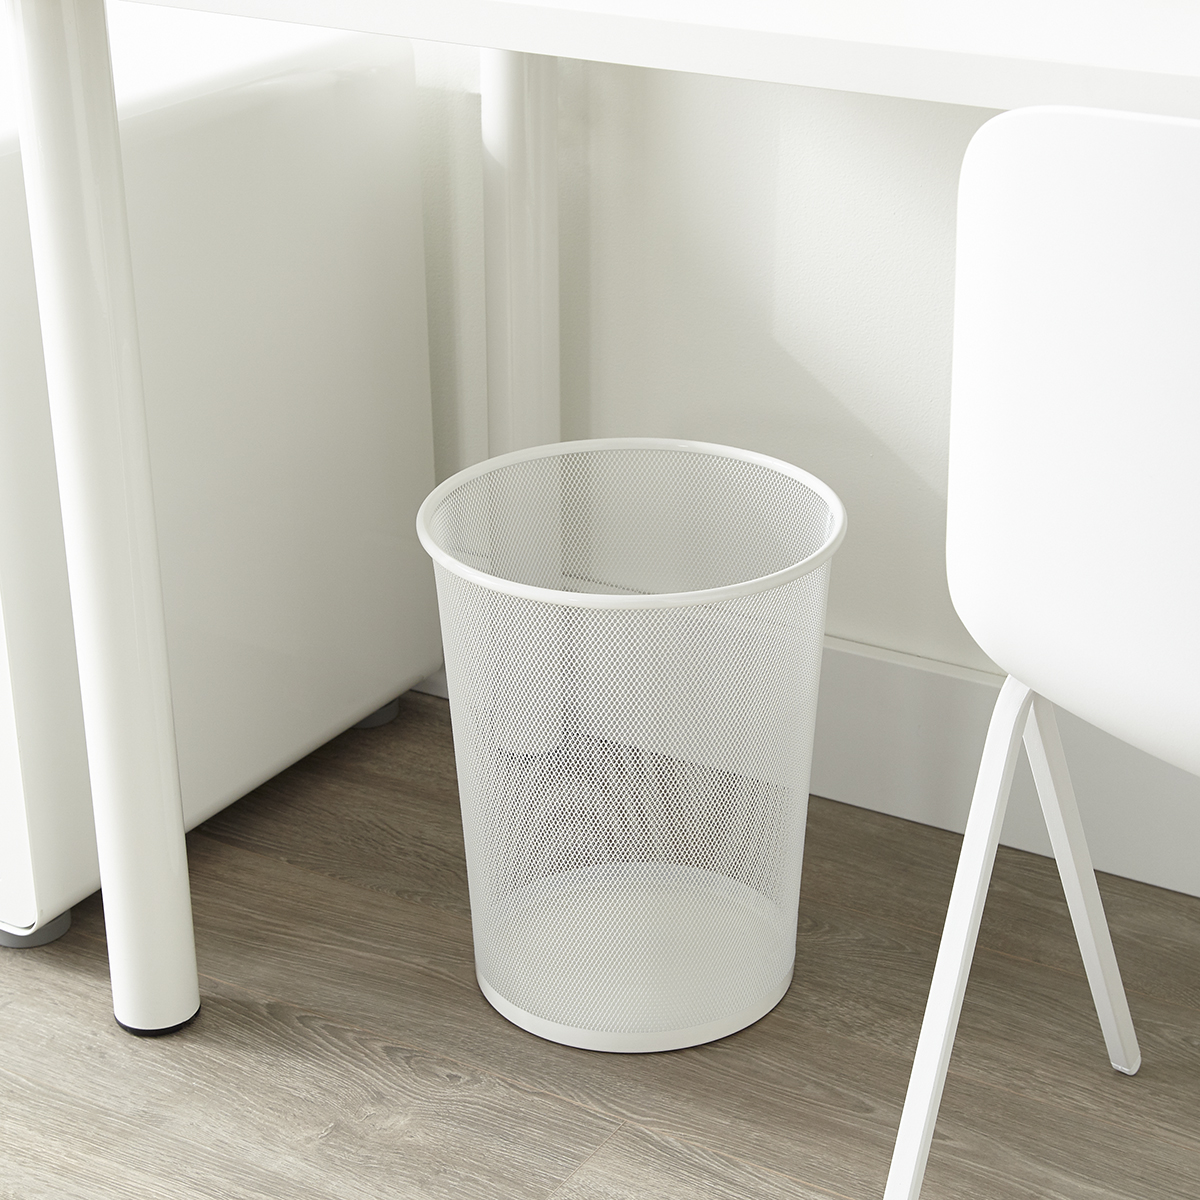 https://www.containerstore.com/catalogimages/415914/10058373_mesh_trashcan_white.jpg